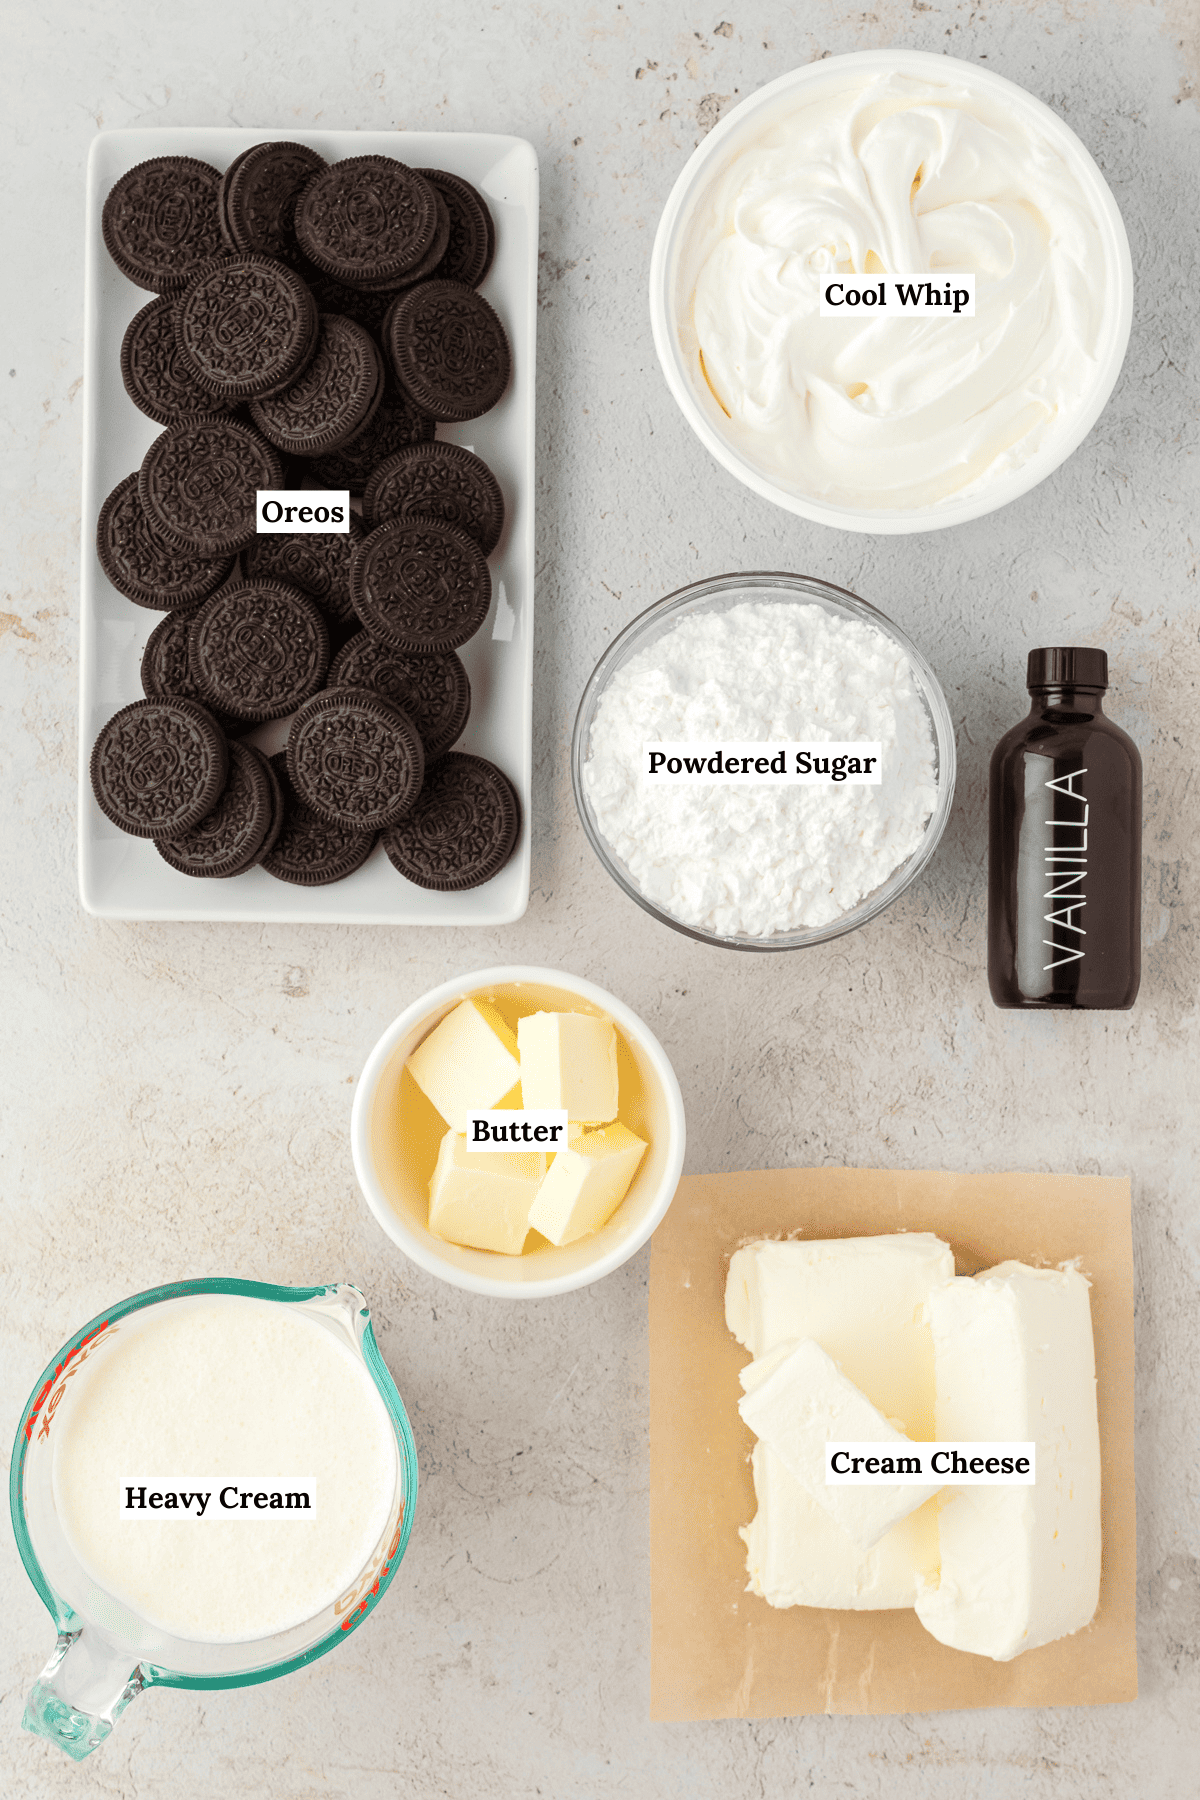 oreo pie ingredients including oreos, cool whip, powdered sugar, vanilla extract, cream cheese, heavy cream and butter